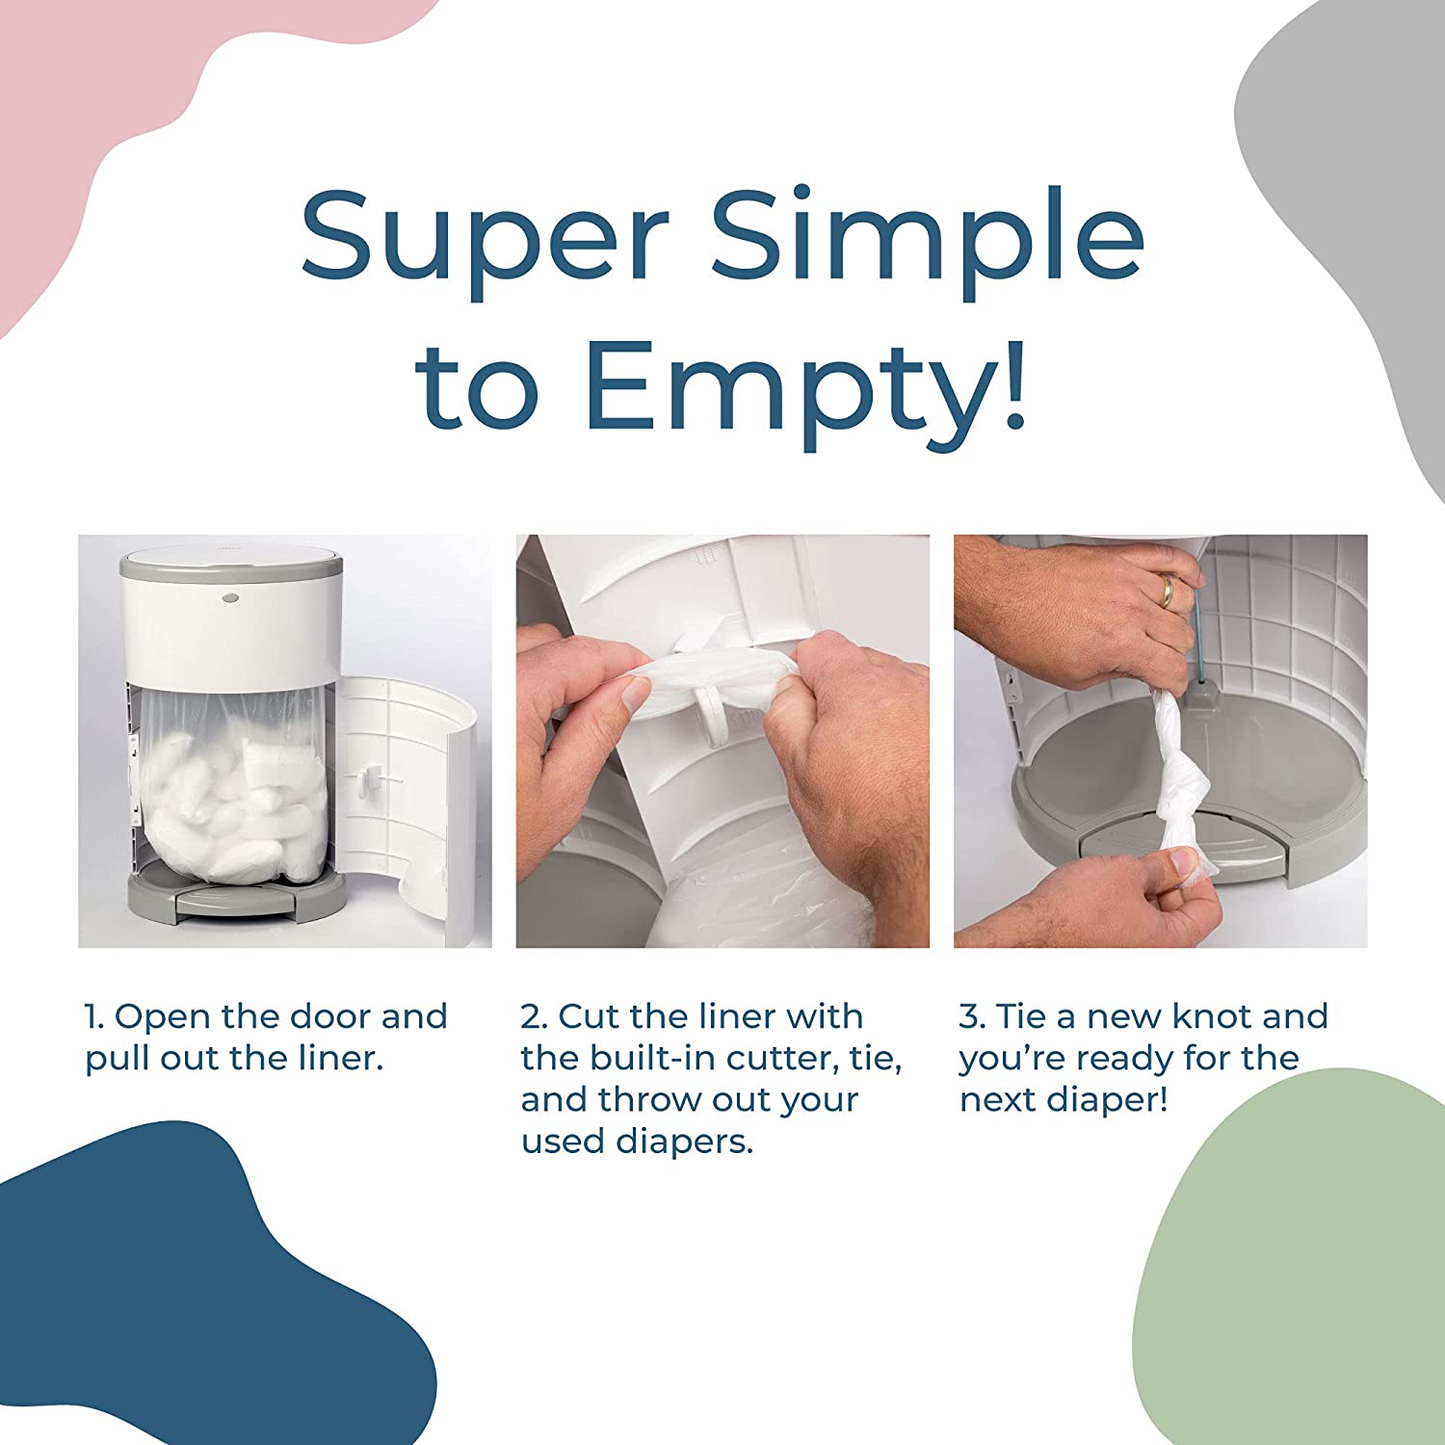 Dekor Classic Hands-Free Diaper Pail | Gray | Easiest to Use | Just Step – Drop – Done | Doesn’T Absorb Odors | 20 Second Bag Change | Most Economical Refill System Animals & Pet Supplies > Pet Supplies > Dog Supplies > Dog Diaper Pads & Liners DEKOR   